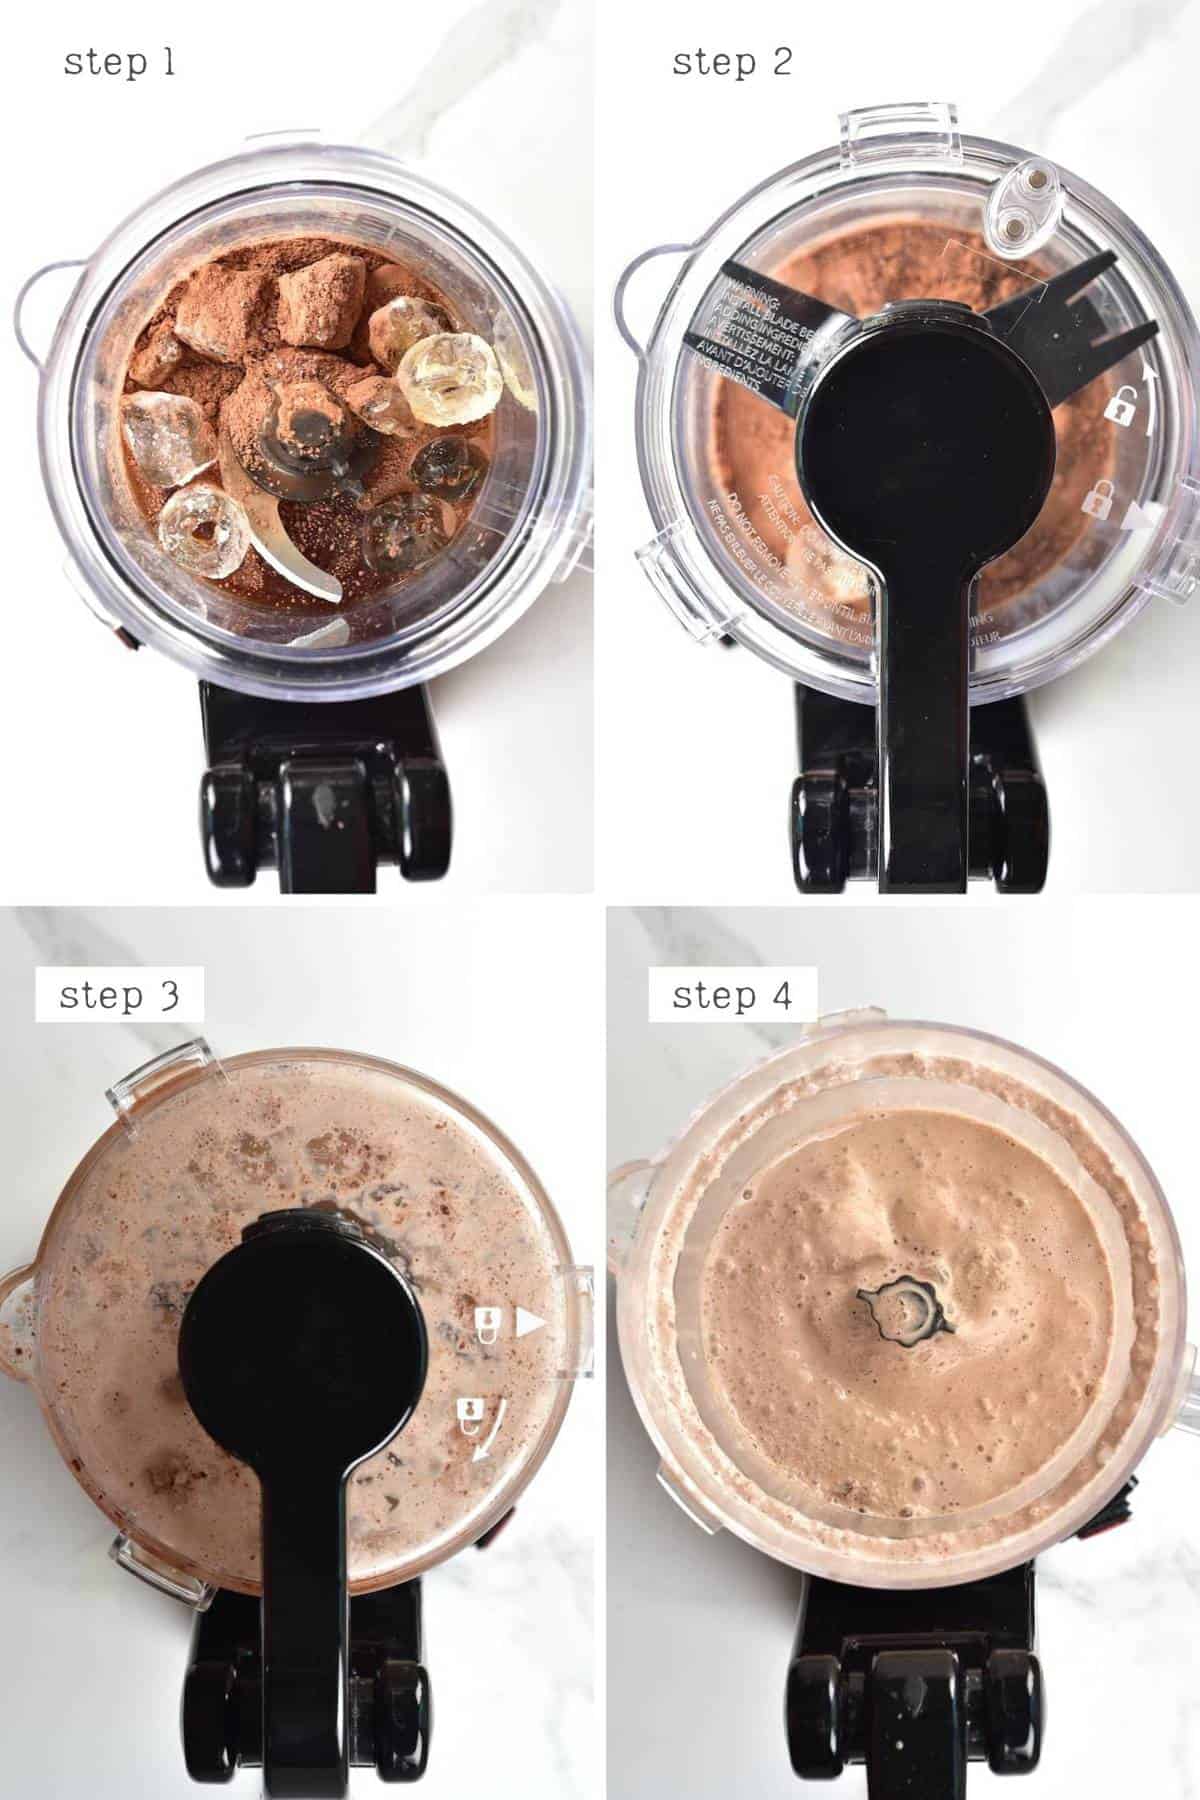 Steps for making mocha frappuccino